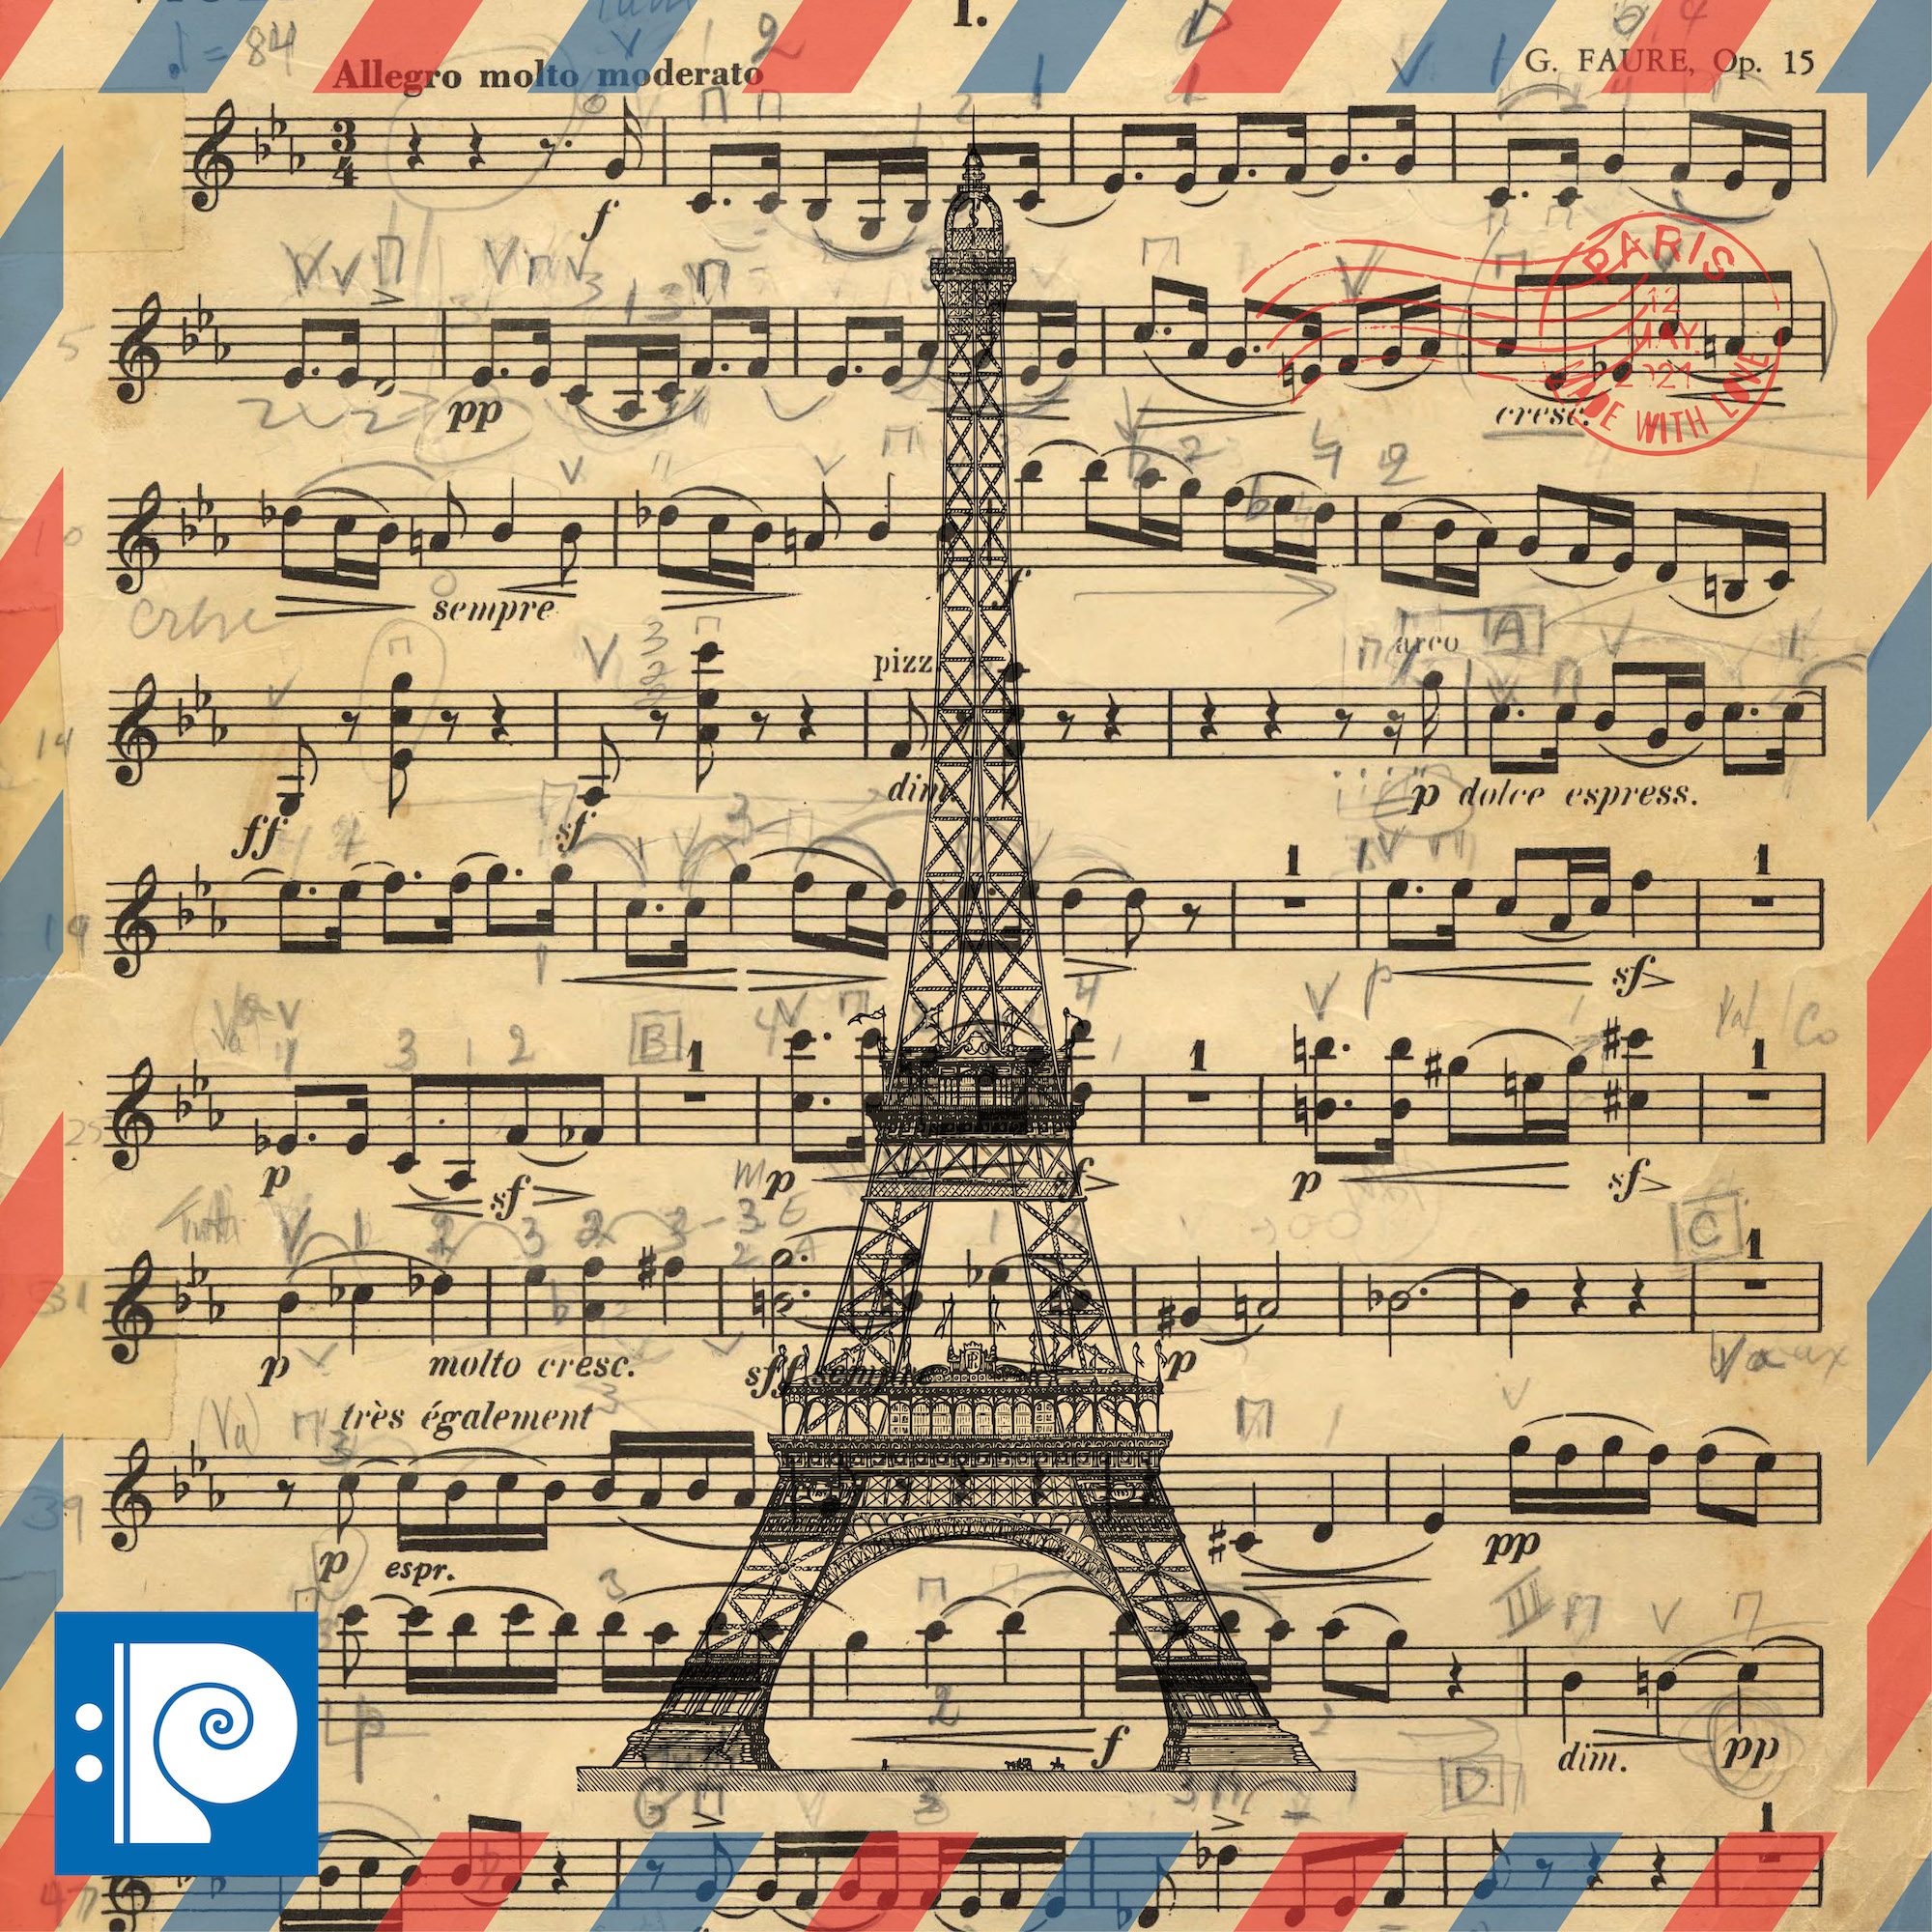 an image of the eiffel tower superimposed over marked up sheet music. The PCMF logo is in the bottom left of the image.